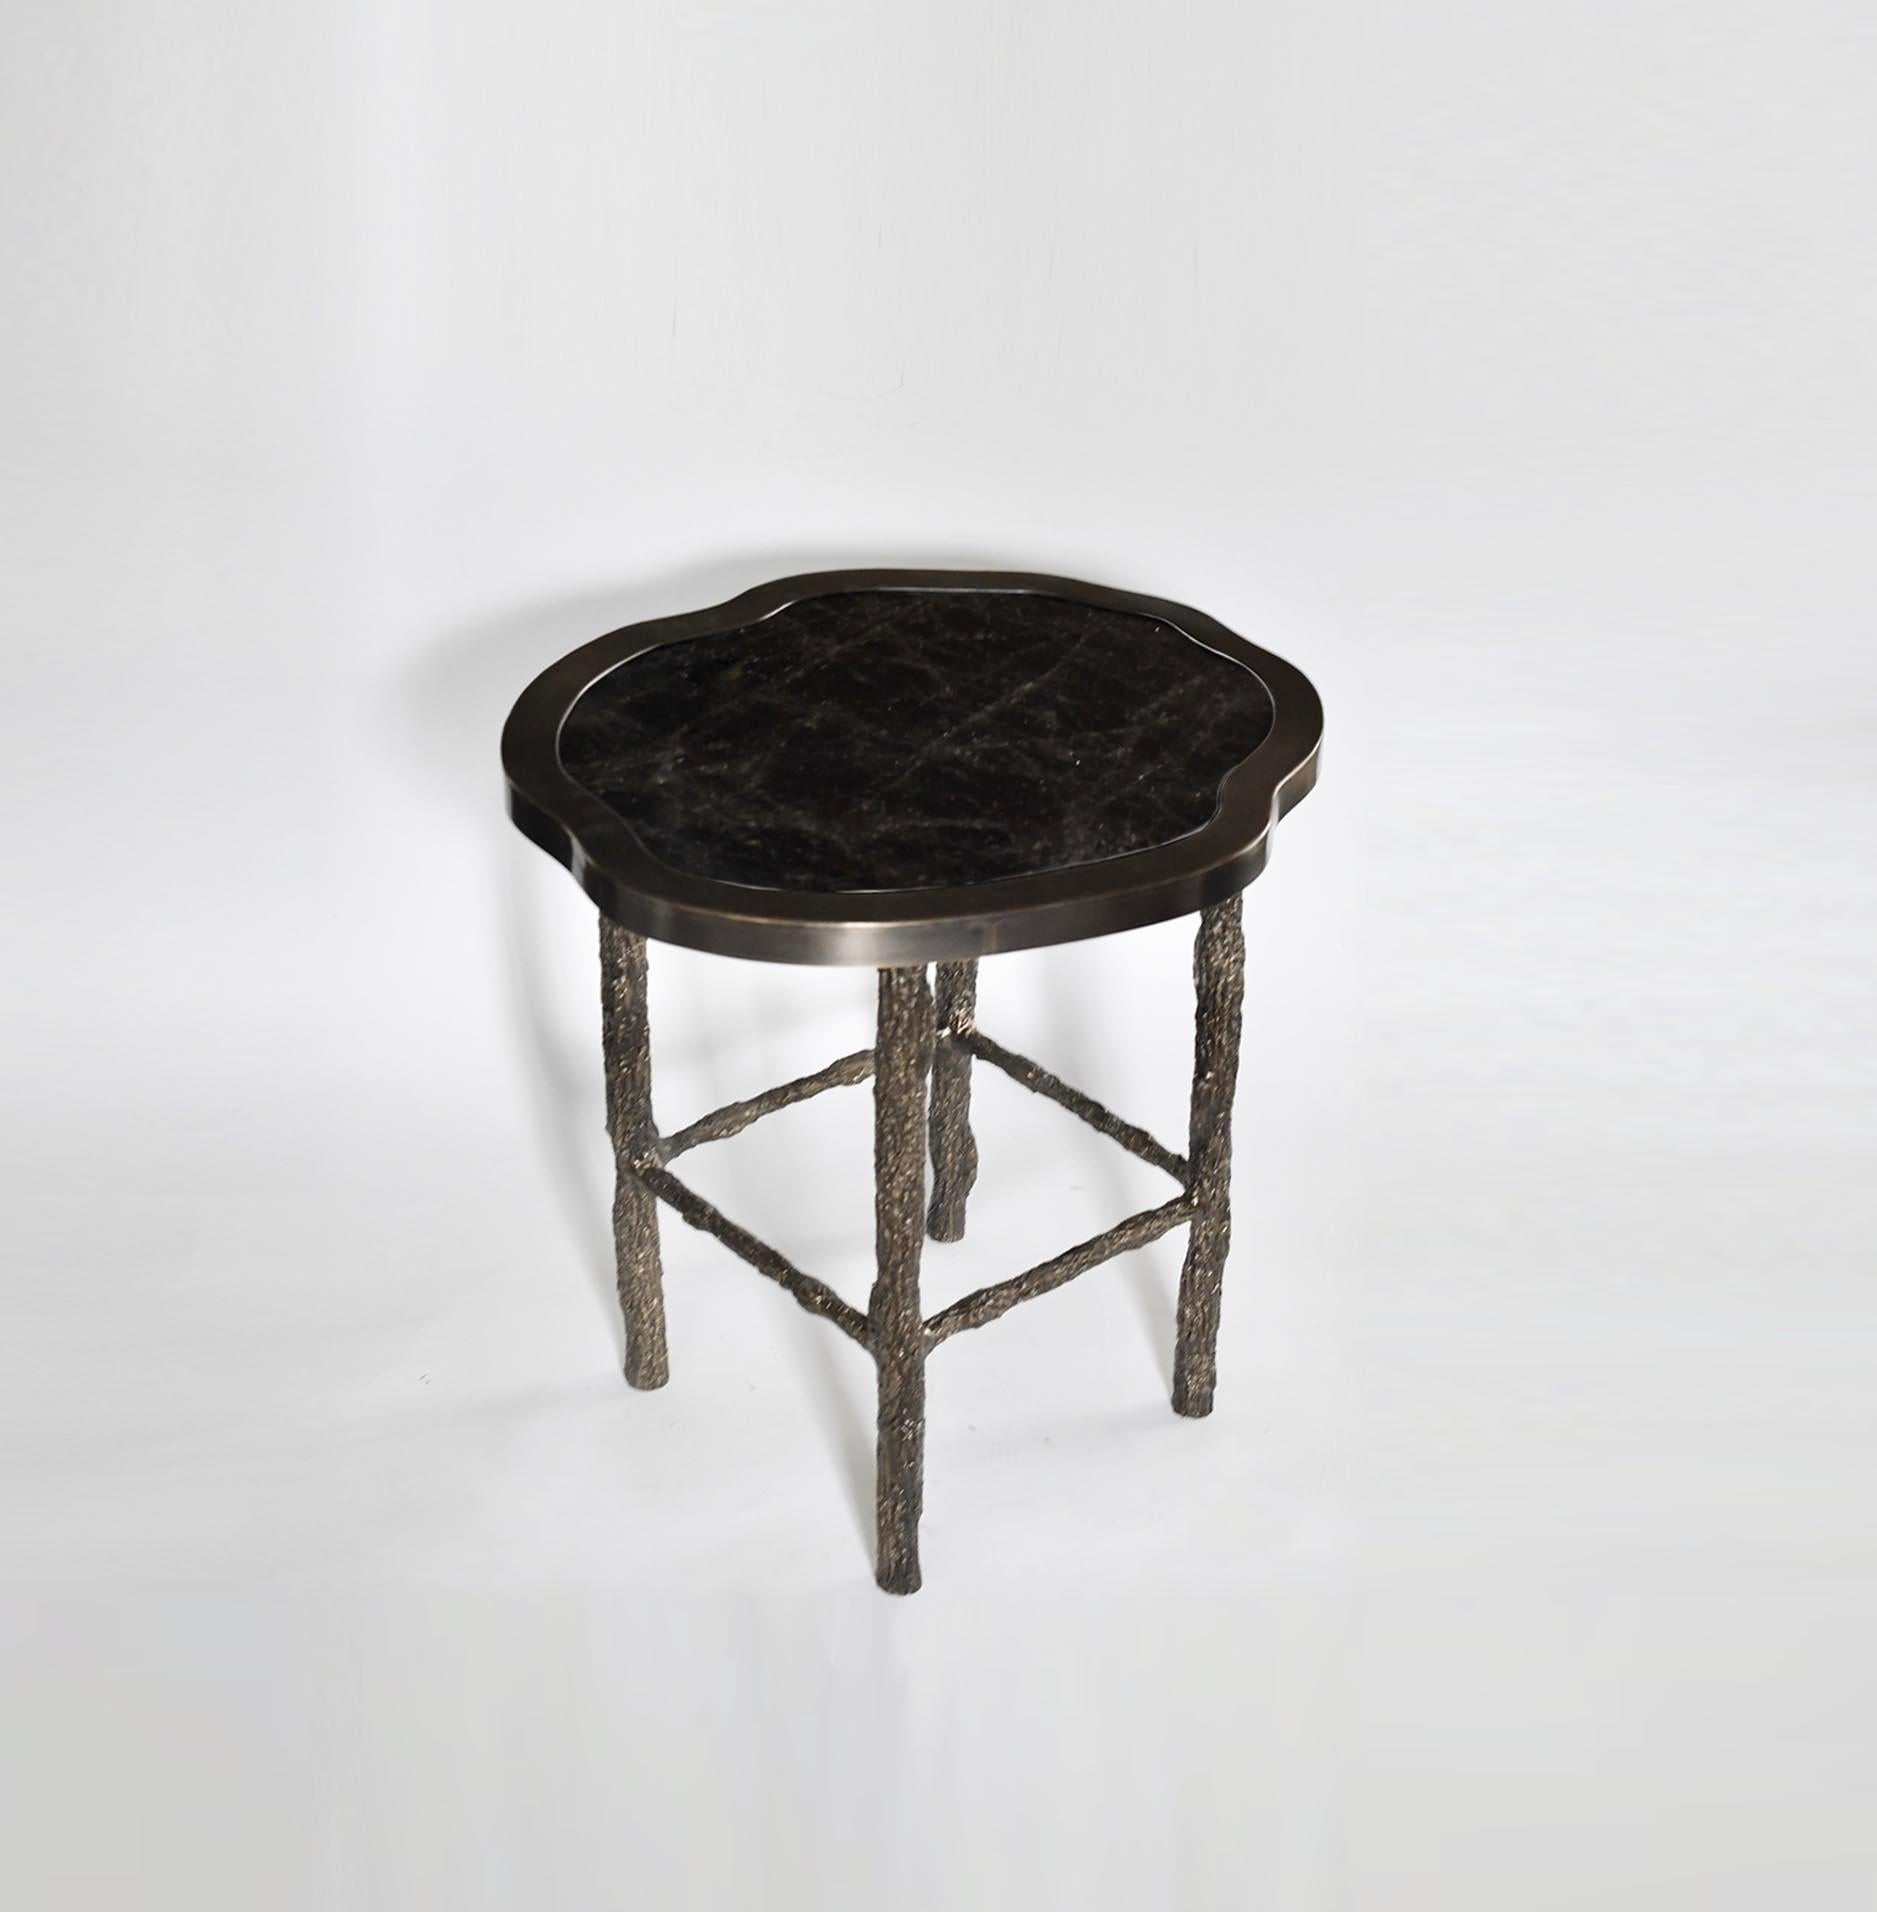 Organic form smoky rock crystal top side table with hammered antique brass frame. the twig inspired bronze legs
Create by Phoenix Gallery. 
Two in stock.
Custom size upon request.